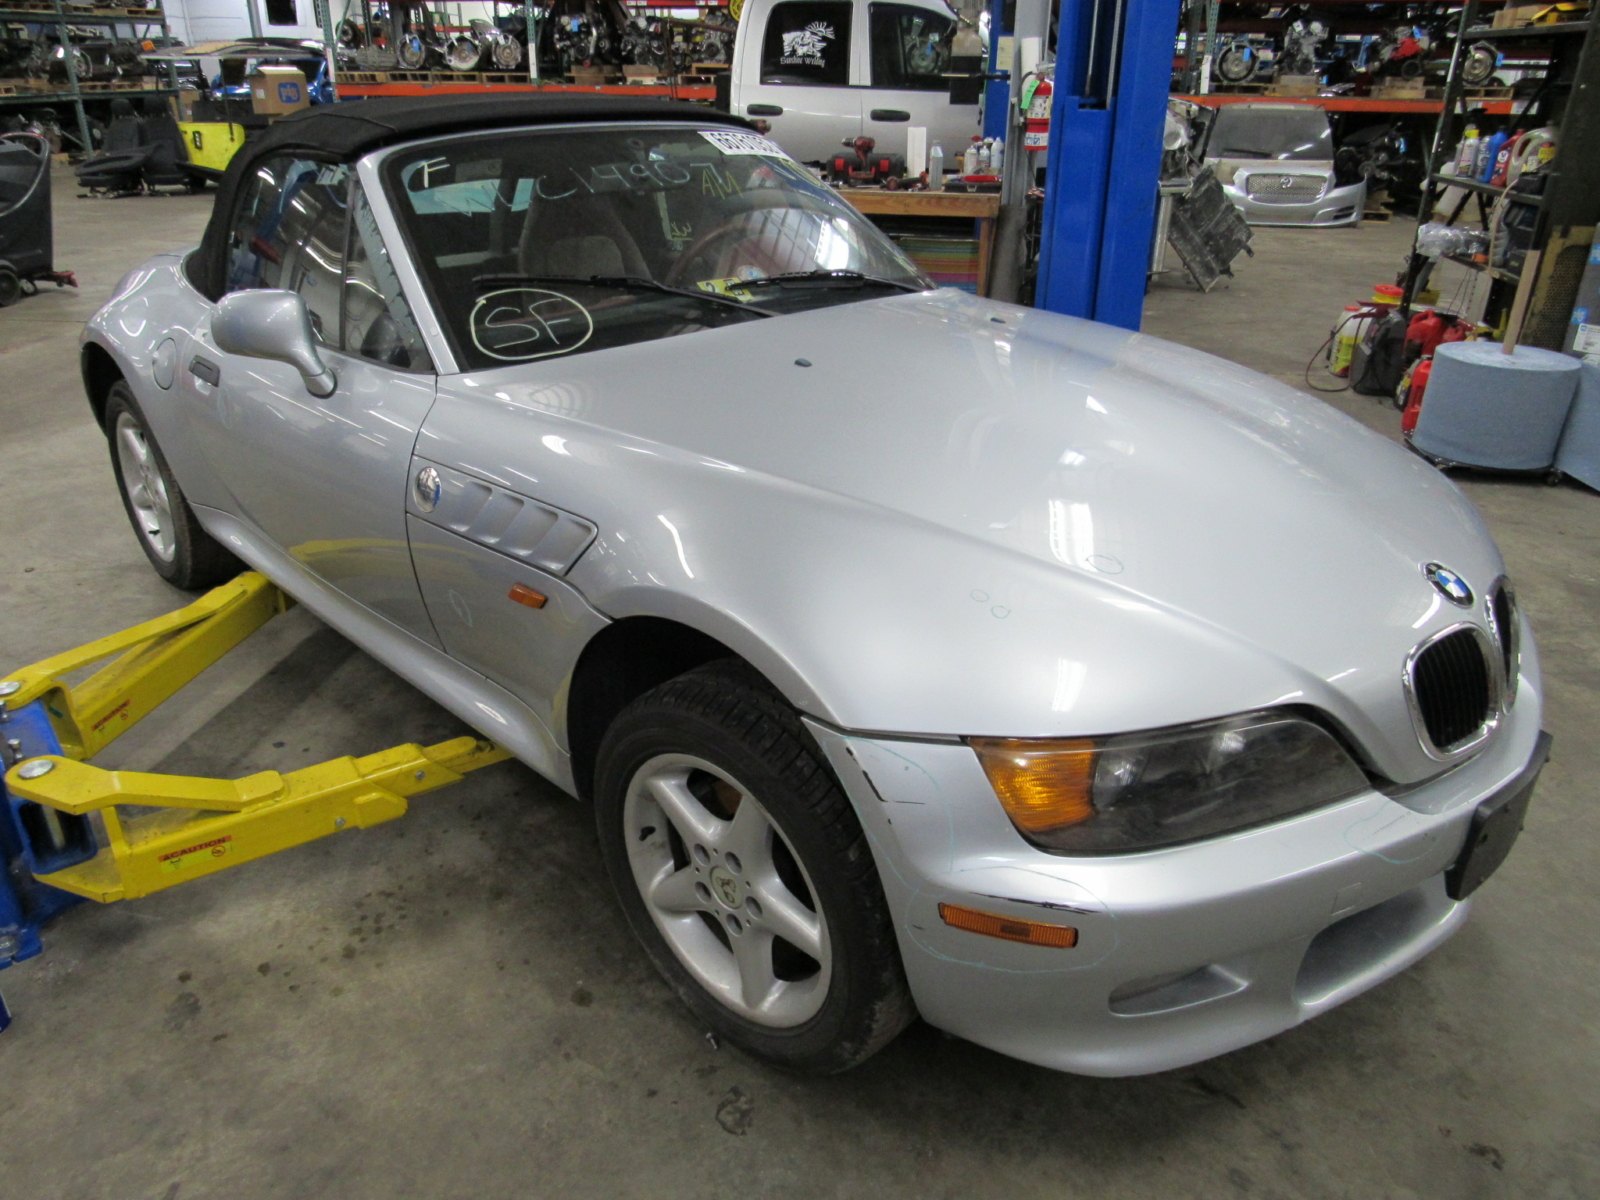 1998 BMW Z3 2.8L M52 5-speed Manual with 62k miles in for parts 3-27-23